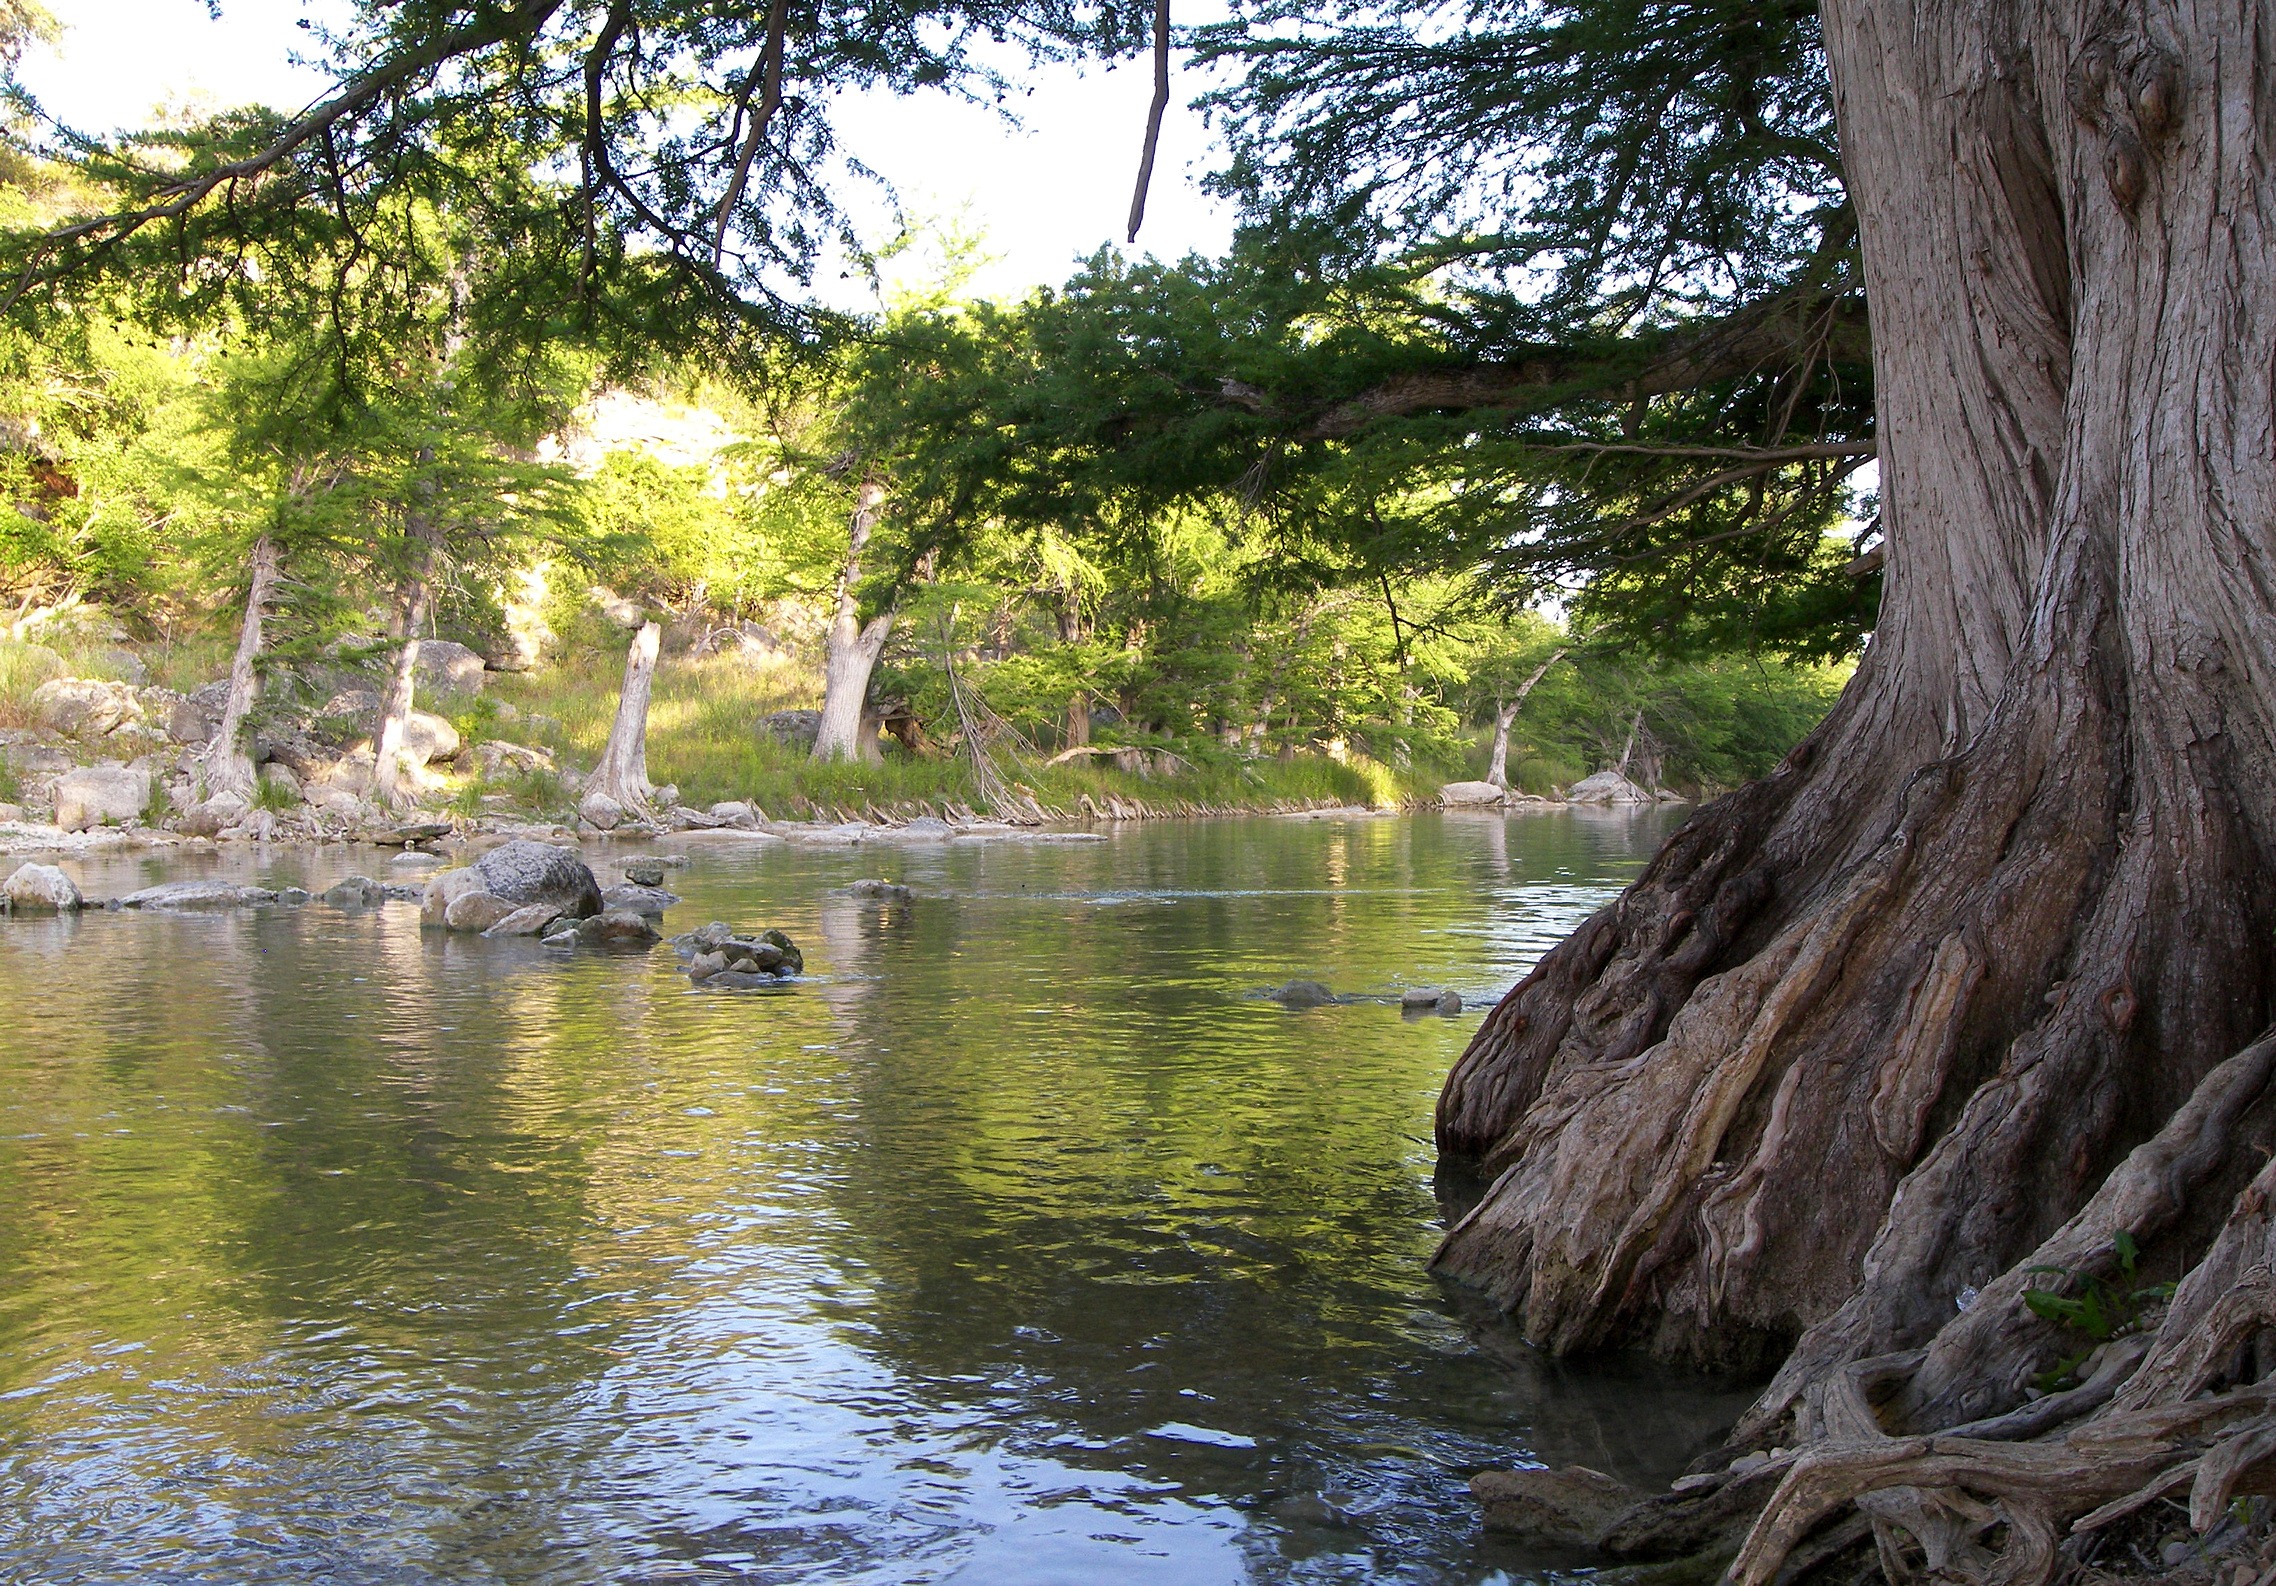 Bald cypress trees on the banks of the Guadalupe River